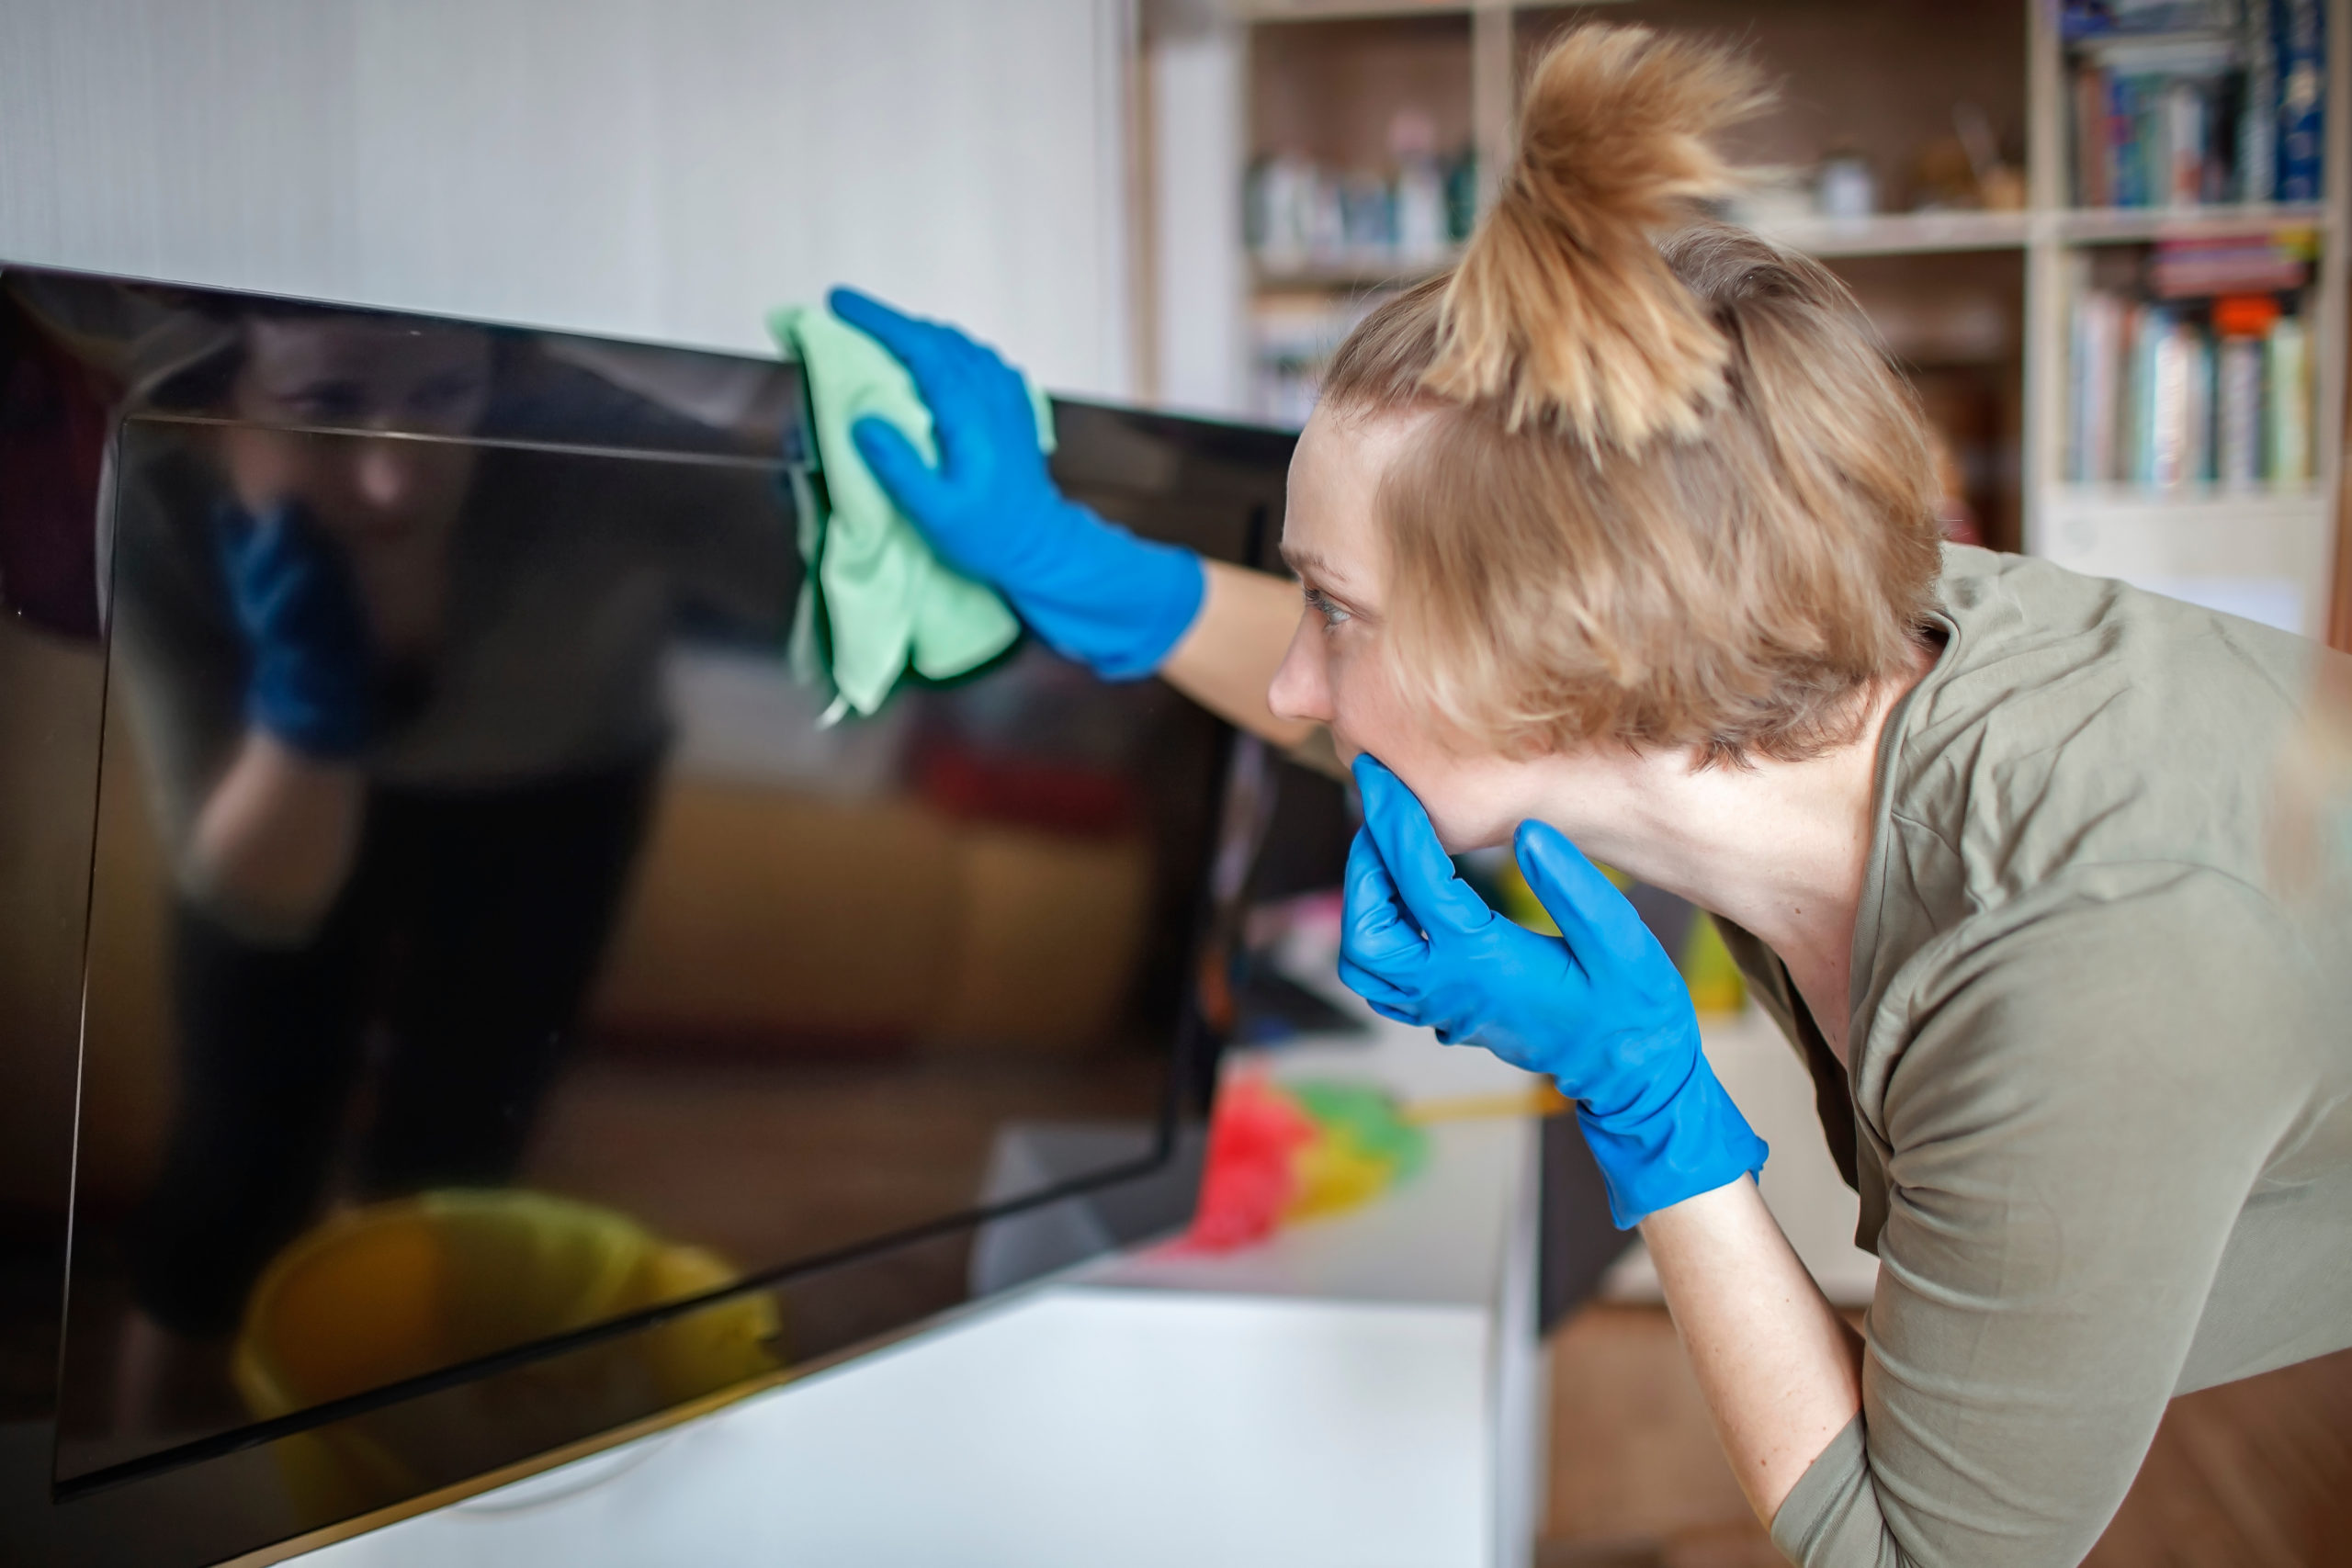 How to clean a TV screen